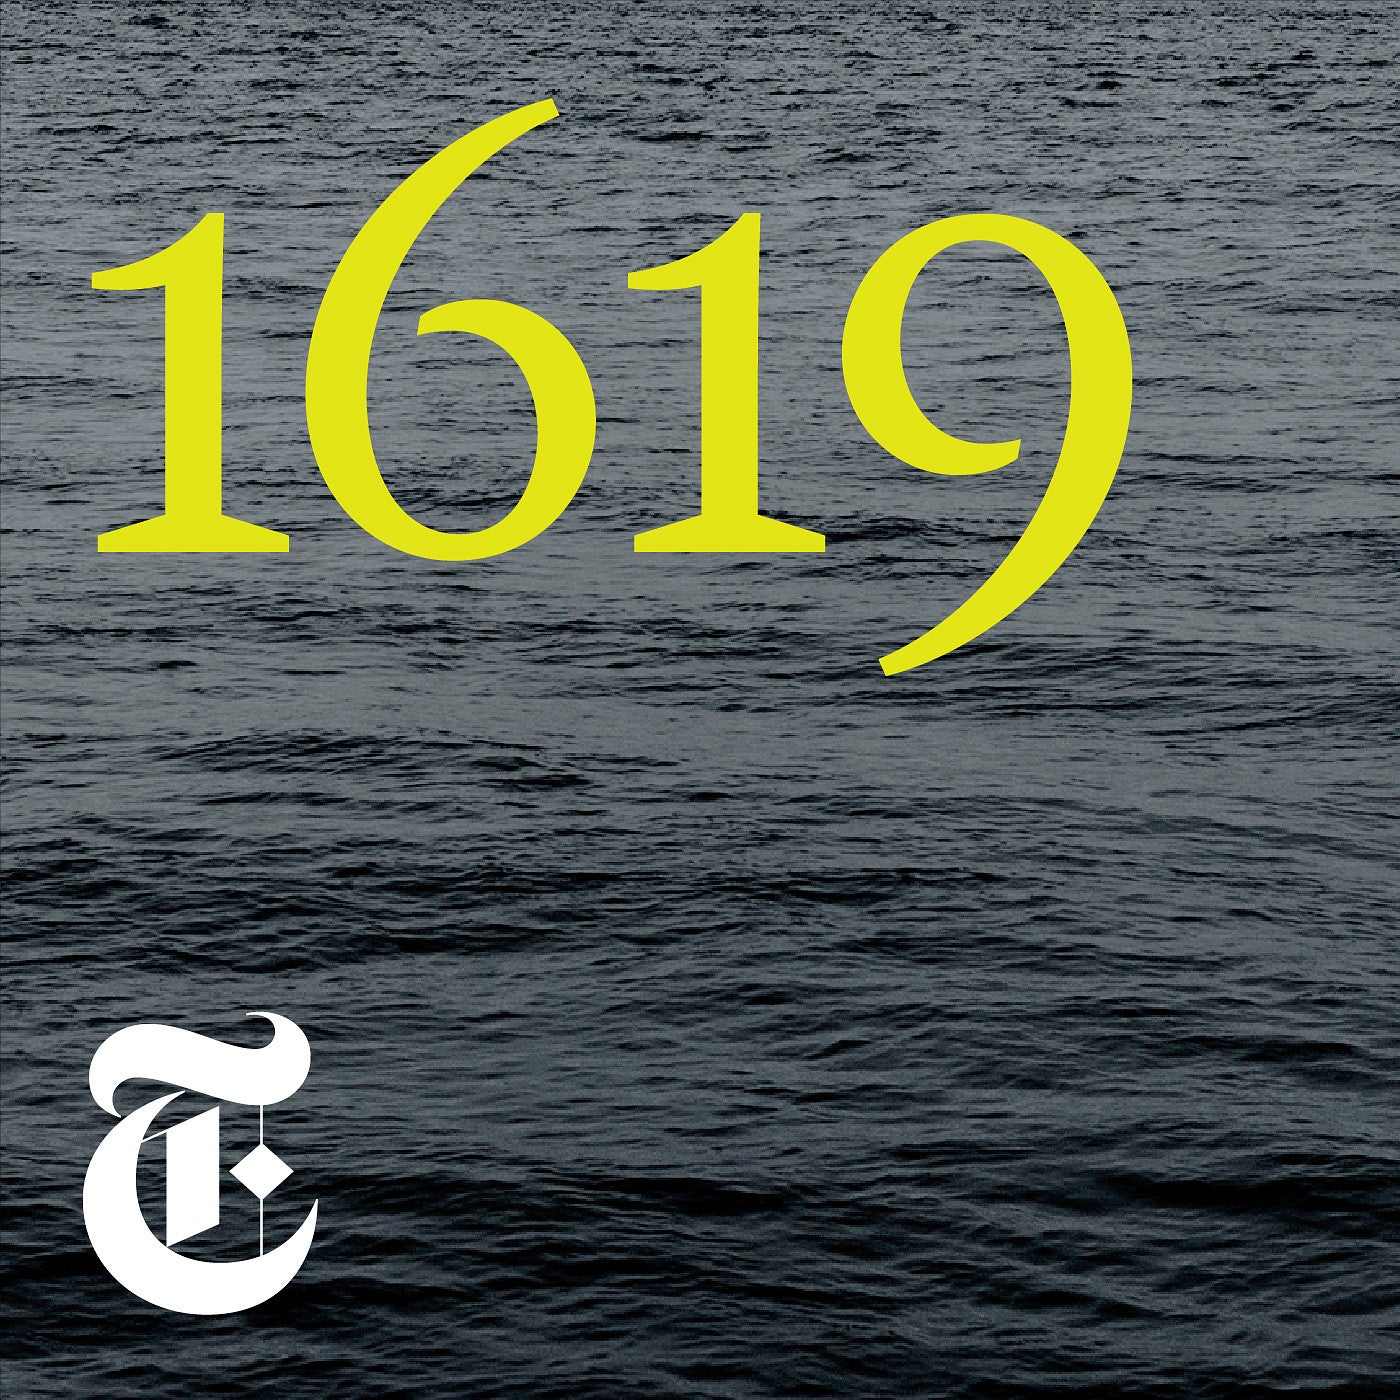 1619 Project from New York Times Magazine